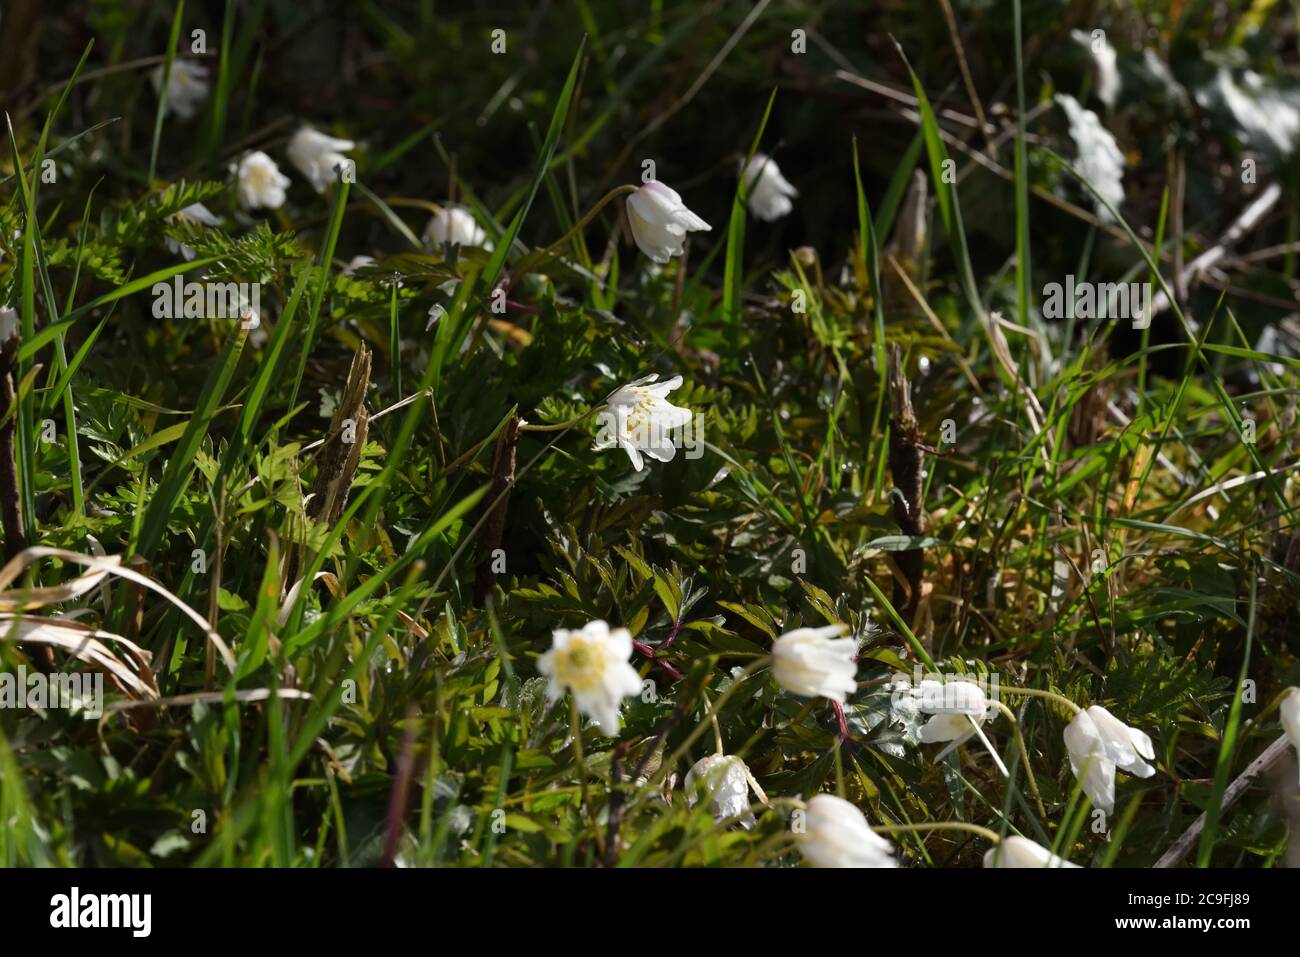 Wood anemone (Anemonoides nemorosa) at the base of a hedgerow in flower during early spring in the English countryside. Stock Photo